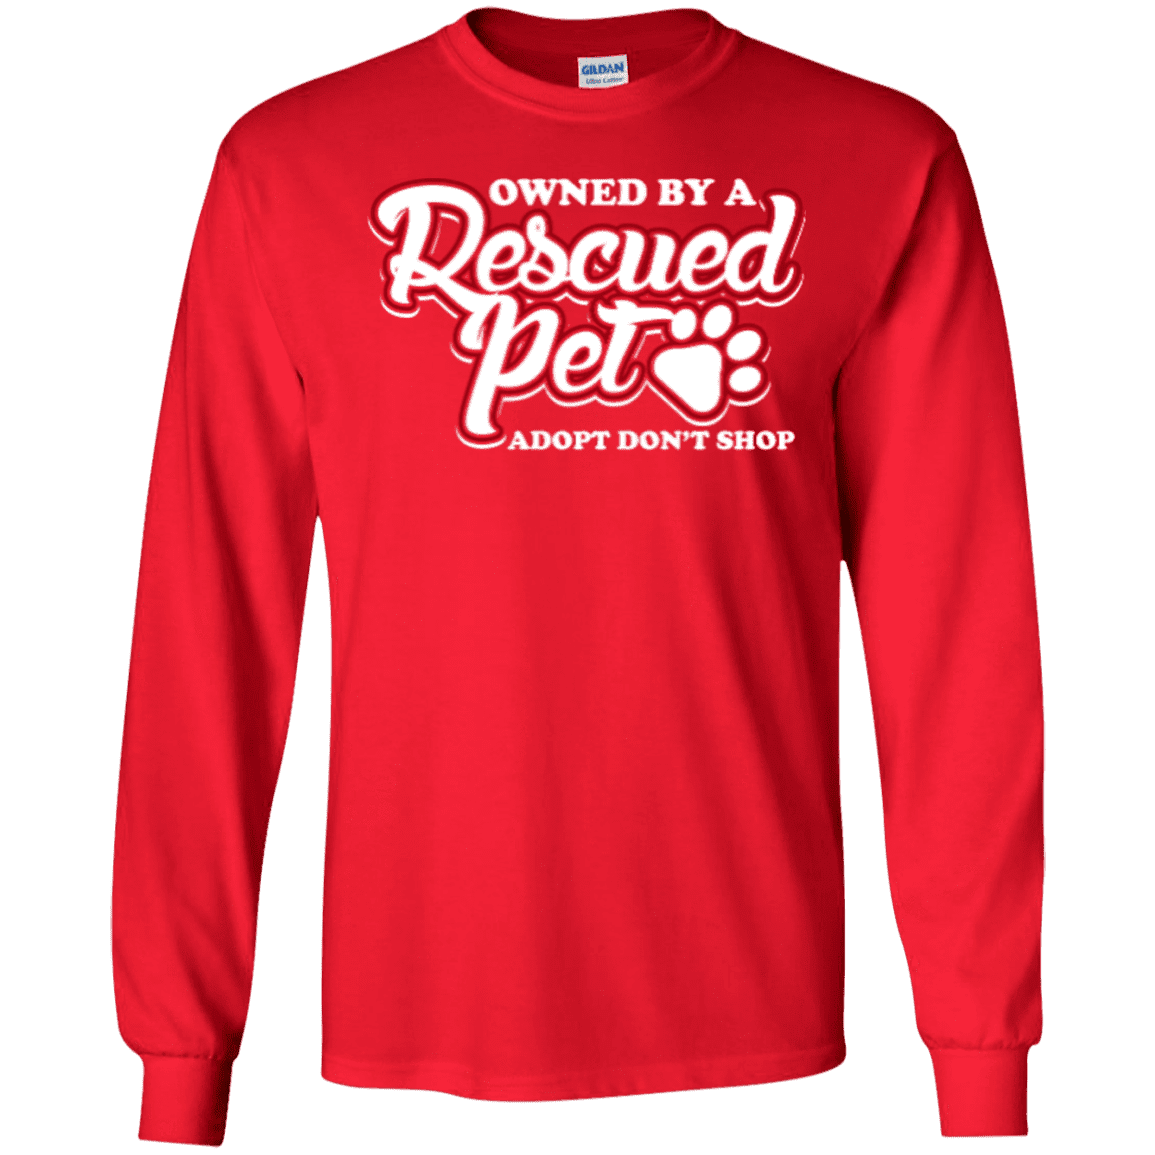 Owned By A Rescued Pet - Long Sleeve T Shirt.